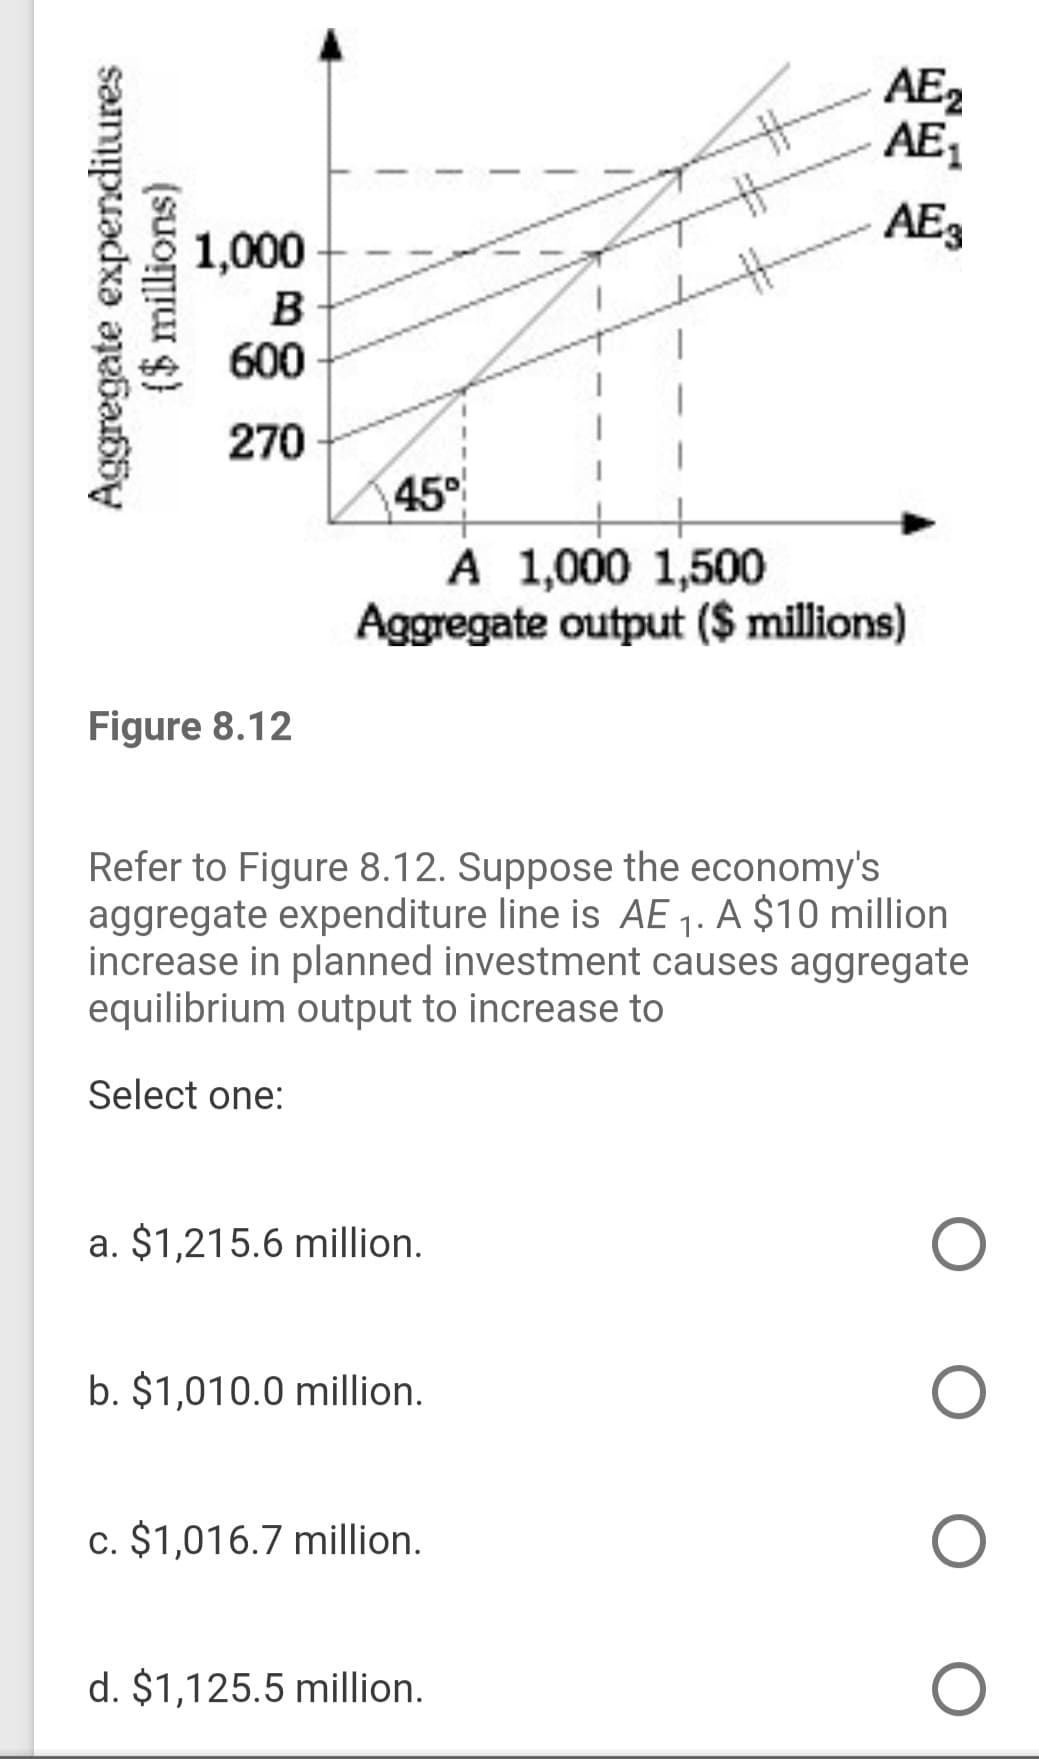 AE2
AE,
AE3
1,000
B
600
270
45
A 1,000 1,500
Aggregate output ($ millions)
Figure 8.12
Refer to Figure 8.12. Suppose the economy's
aggregate expenditure line is AE 1. A $10 million
increase in planned investment causes aggregate
equilibrium output to increase to
Select one:
a. $1,215.6 million.
b. $1,010.0 million.
c. $1,016.7 million.
d. $1,125.5 million.
Aggregate expenditures
($ millions)
